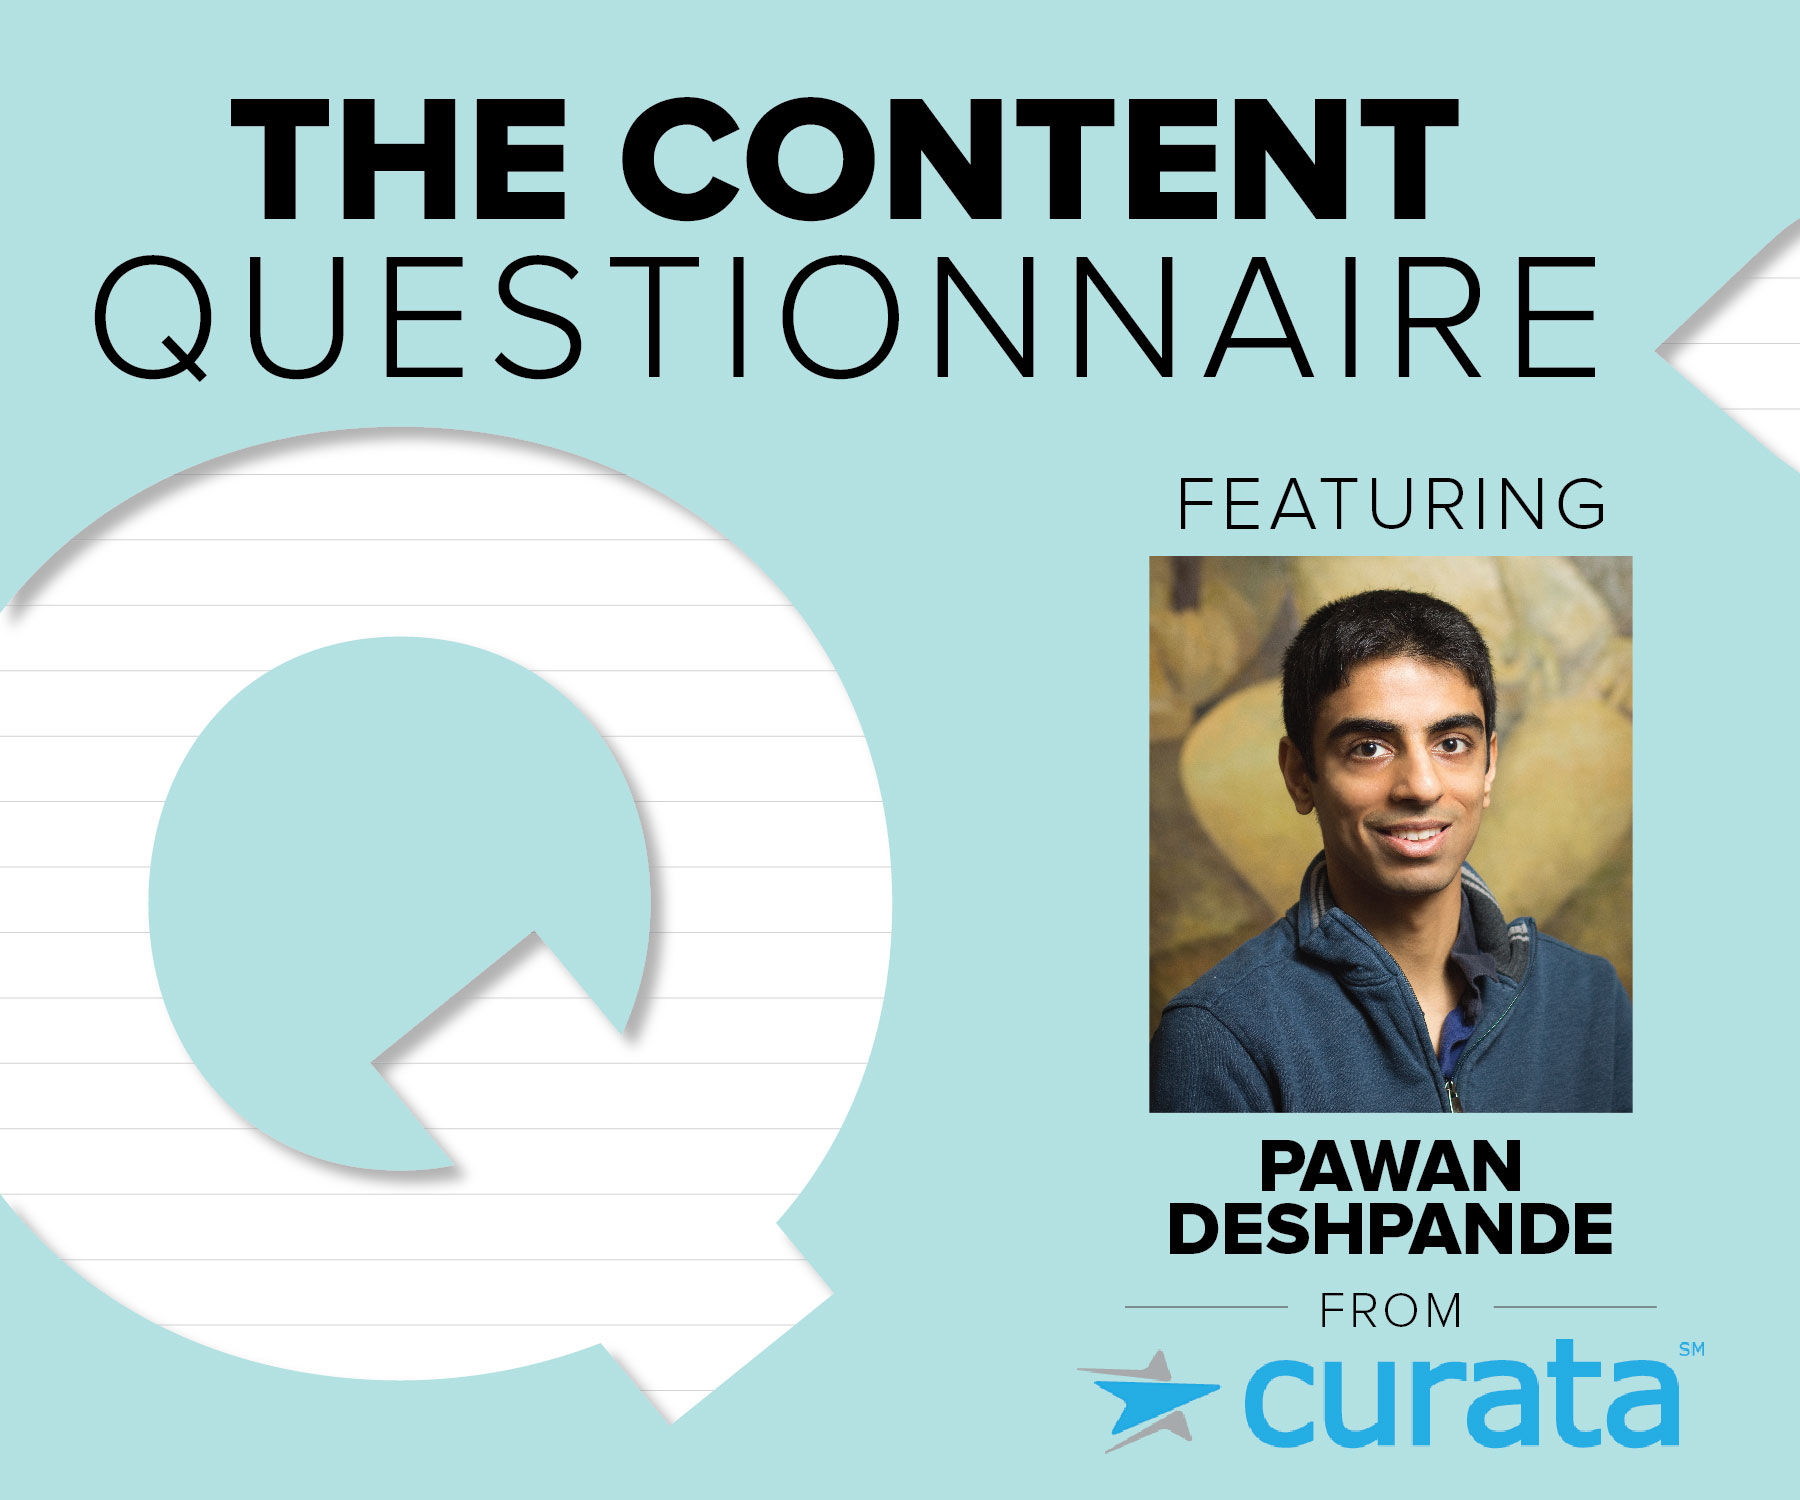 Curata CEO Pawan Desphande gives us his answers about what makes for great marketing or missed opportunities online.